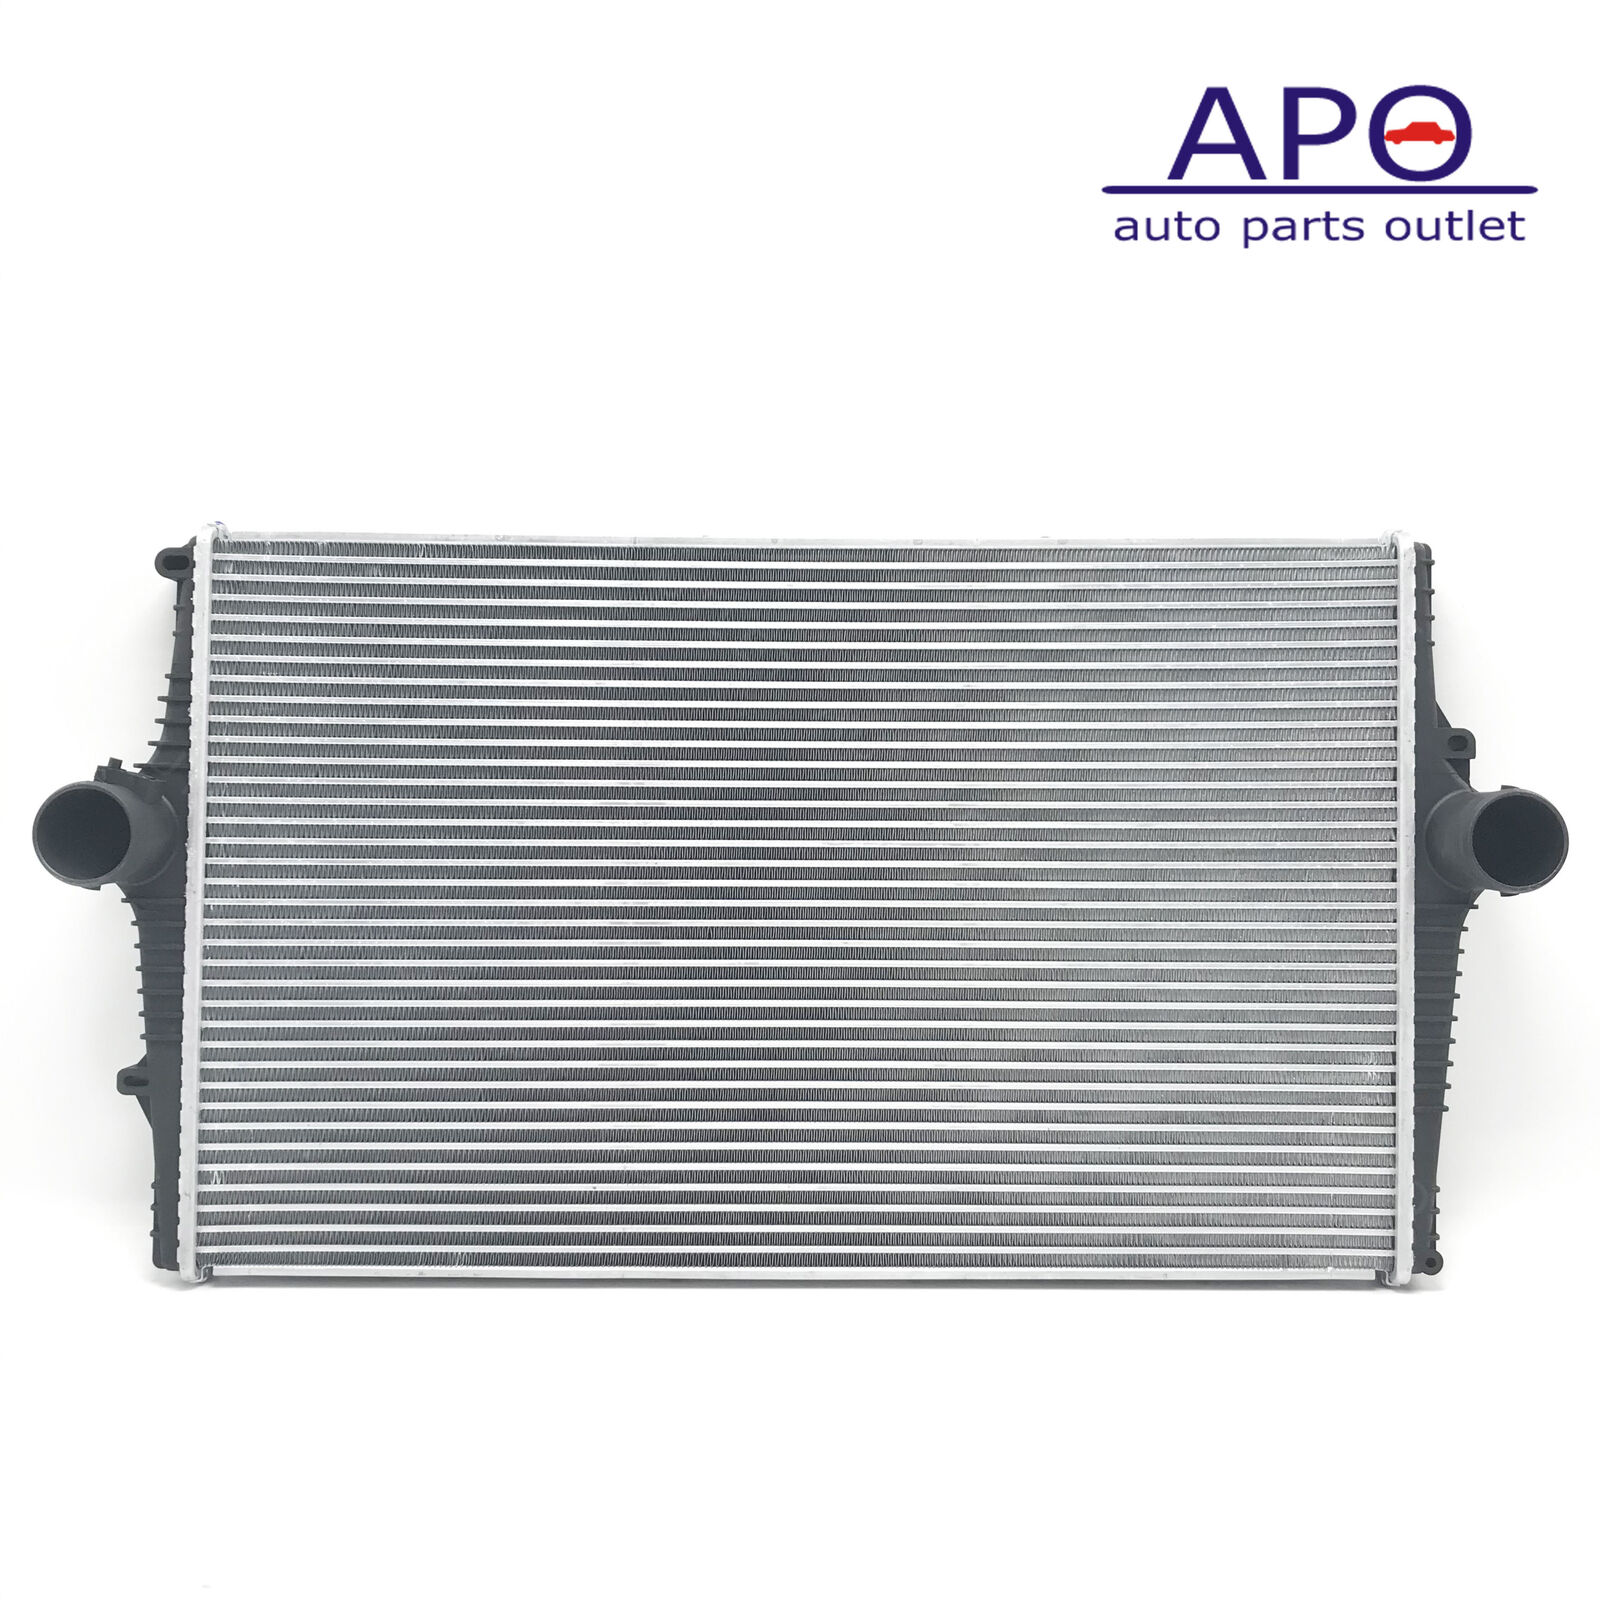 Intercooler Charge Air Cooler 8671694 For Volvo 03-05 V70 03-09 S60 03-06 S80 